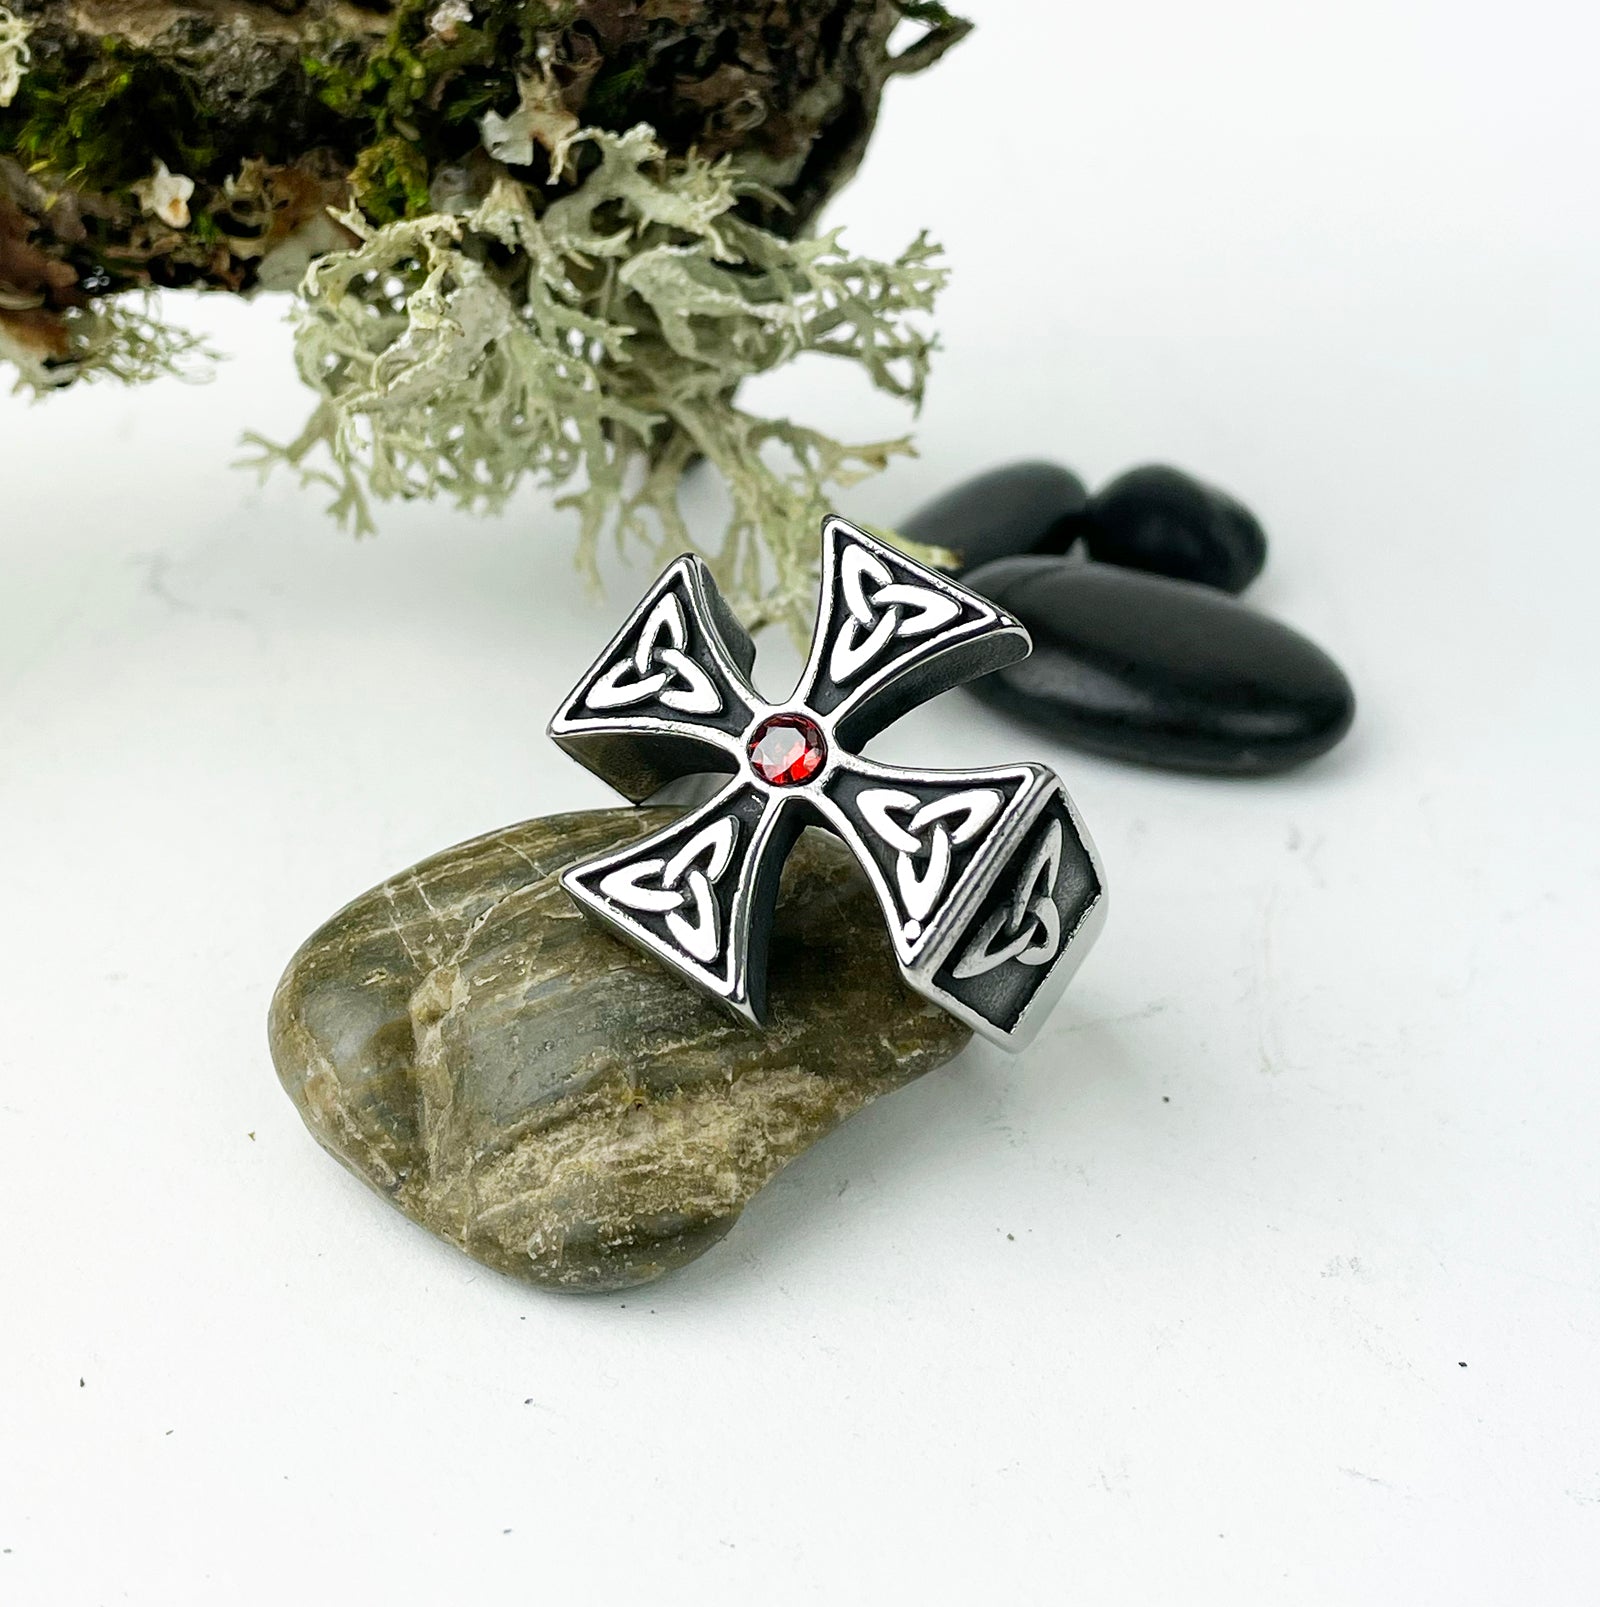 Square Cross with Triknots and Red Stone